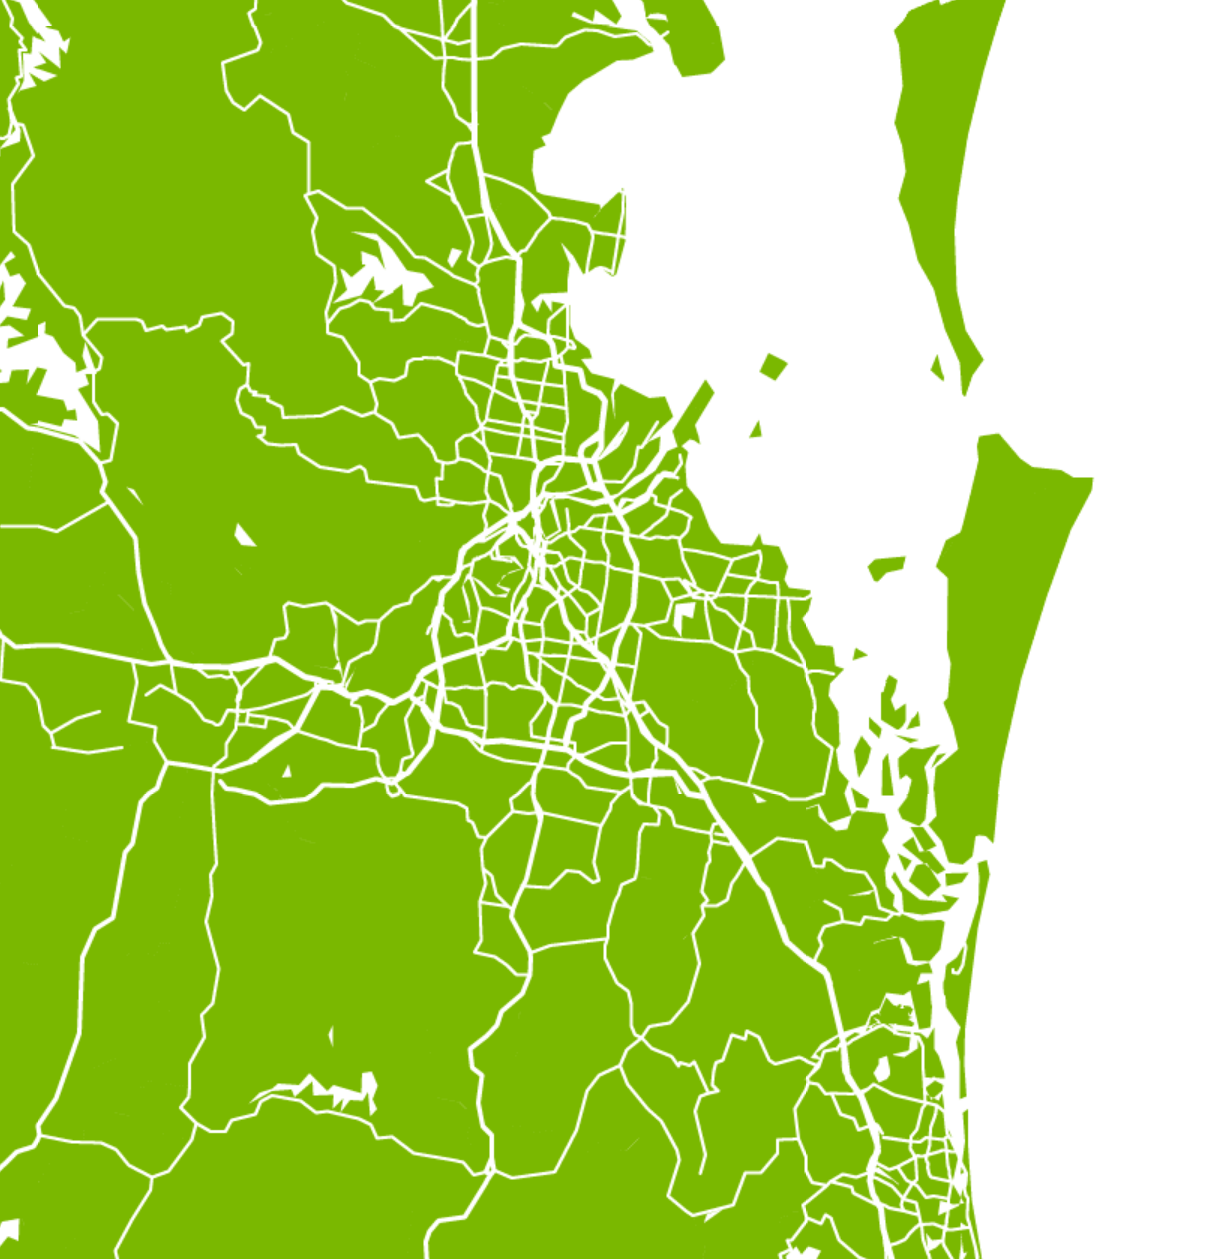 Map of south east Queensland with pin drop locations